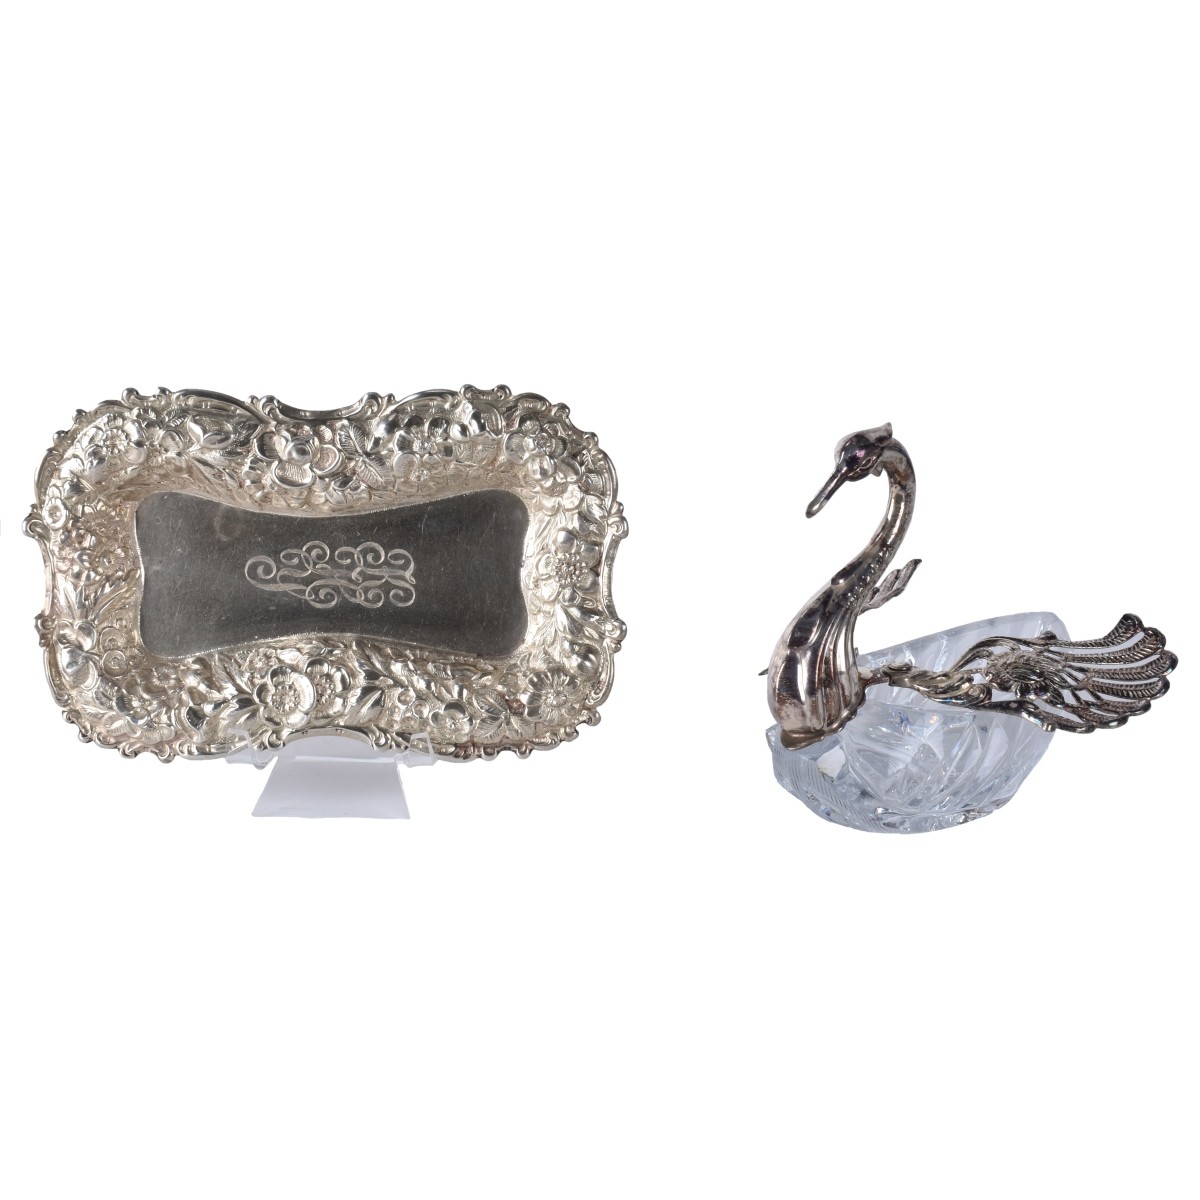 Two (2) Piece Lot: Sterling Silver Dish and Swan